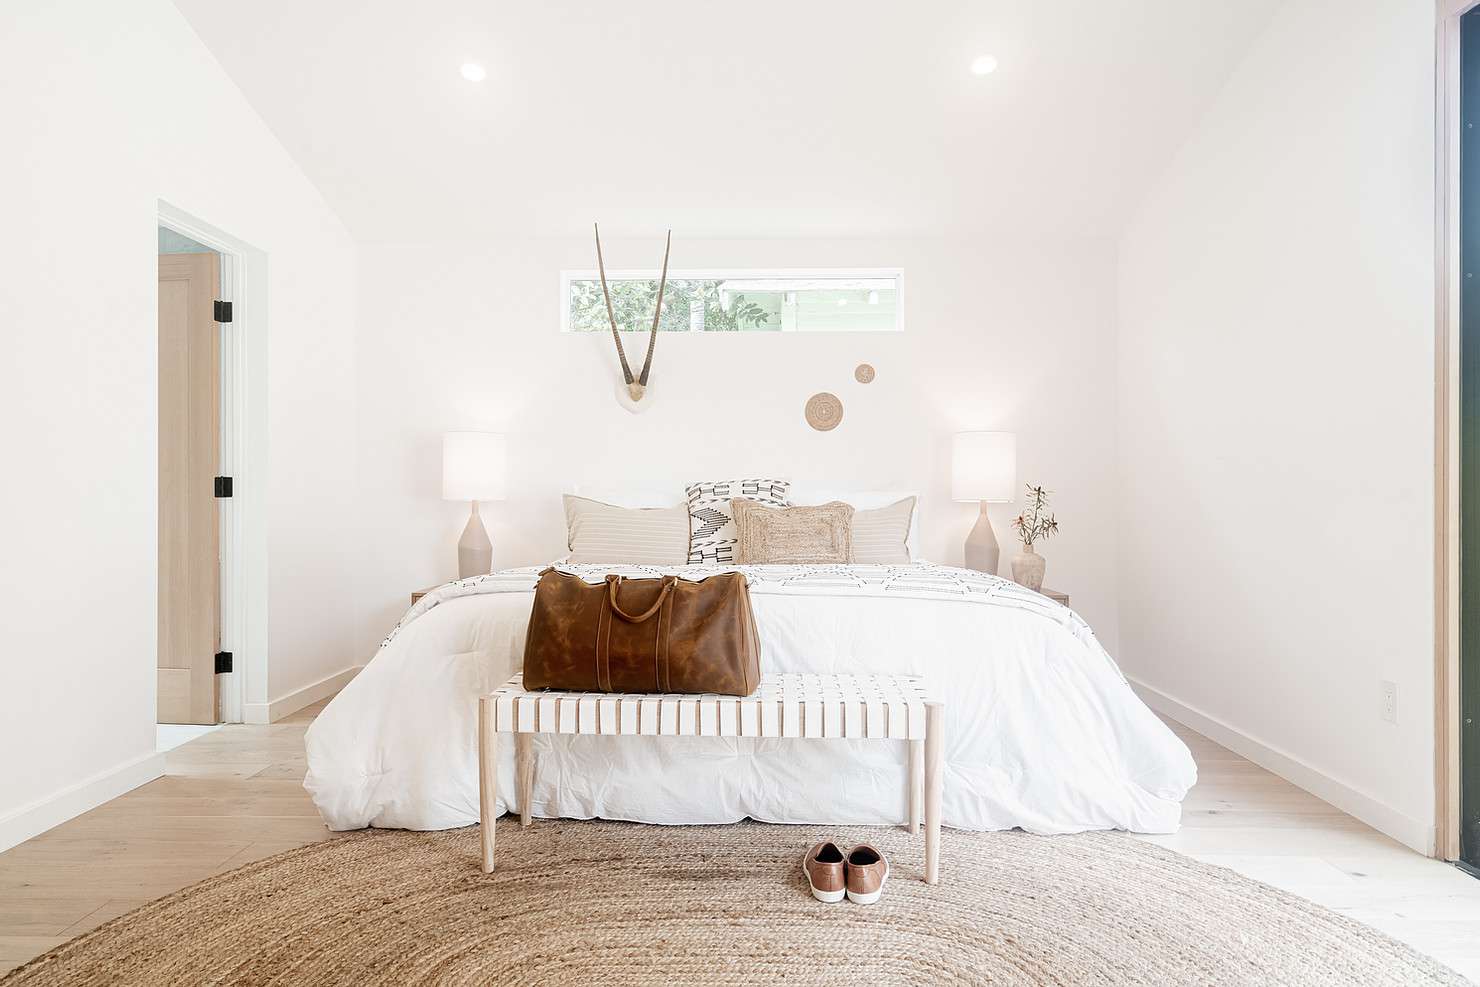 Crisp, clean bedroom with white walls and bedding